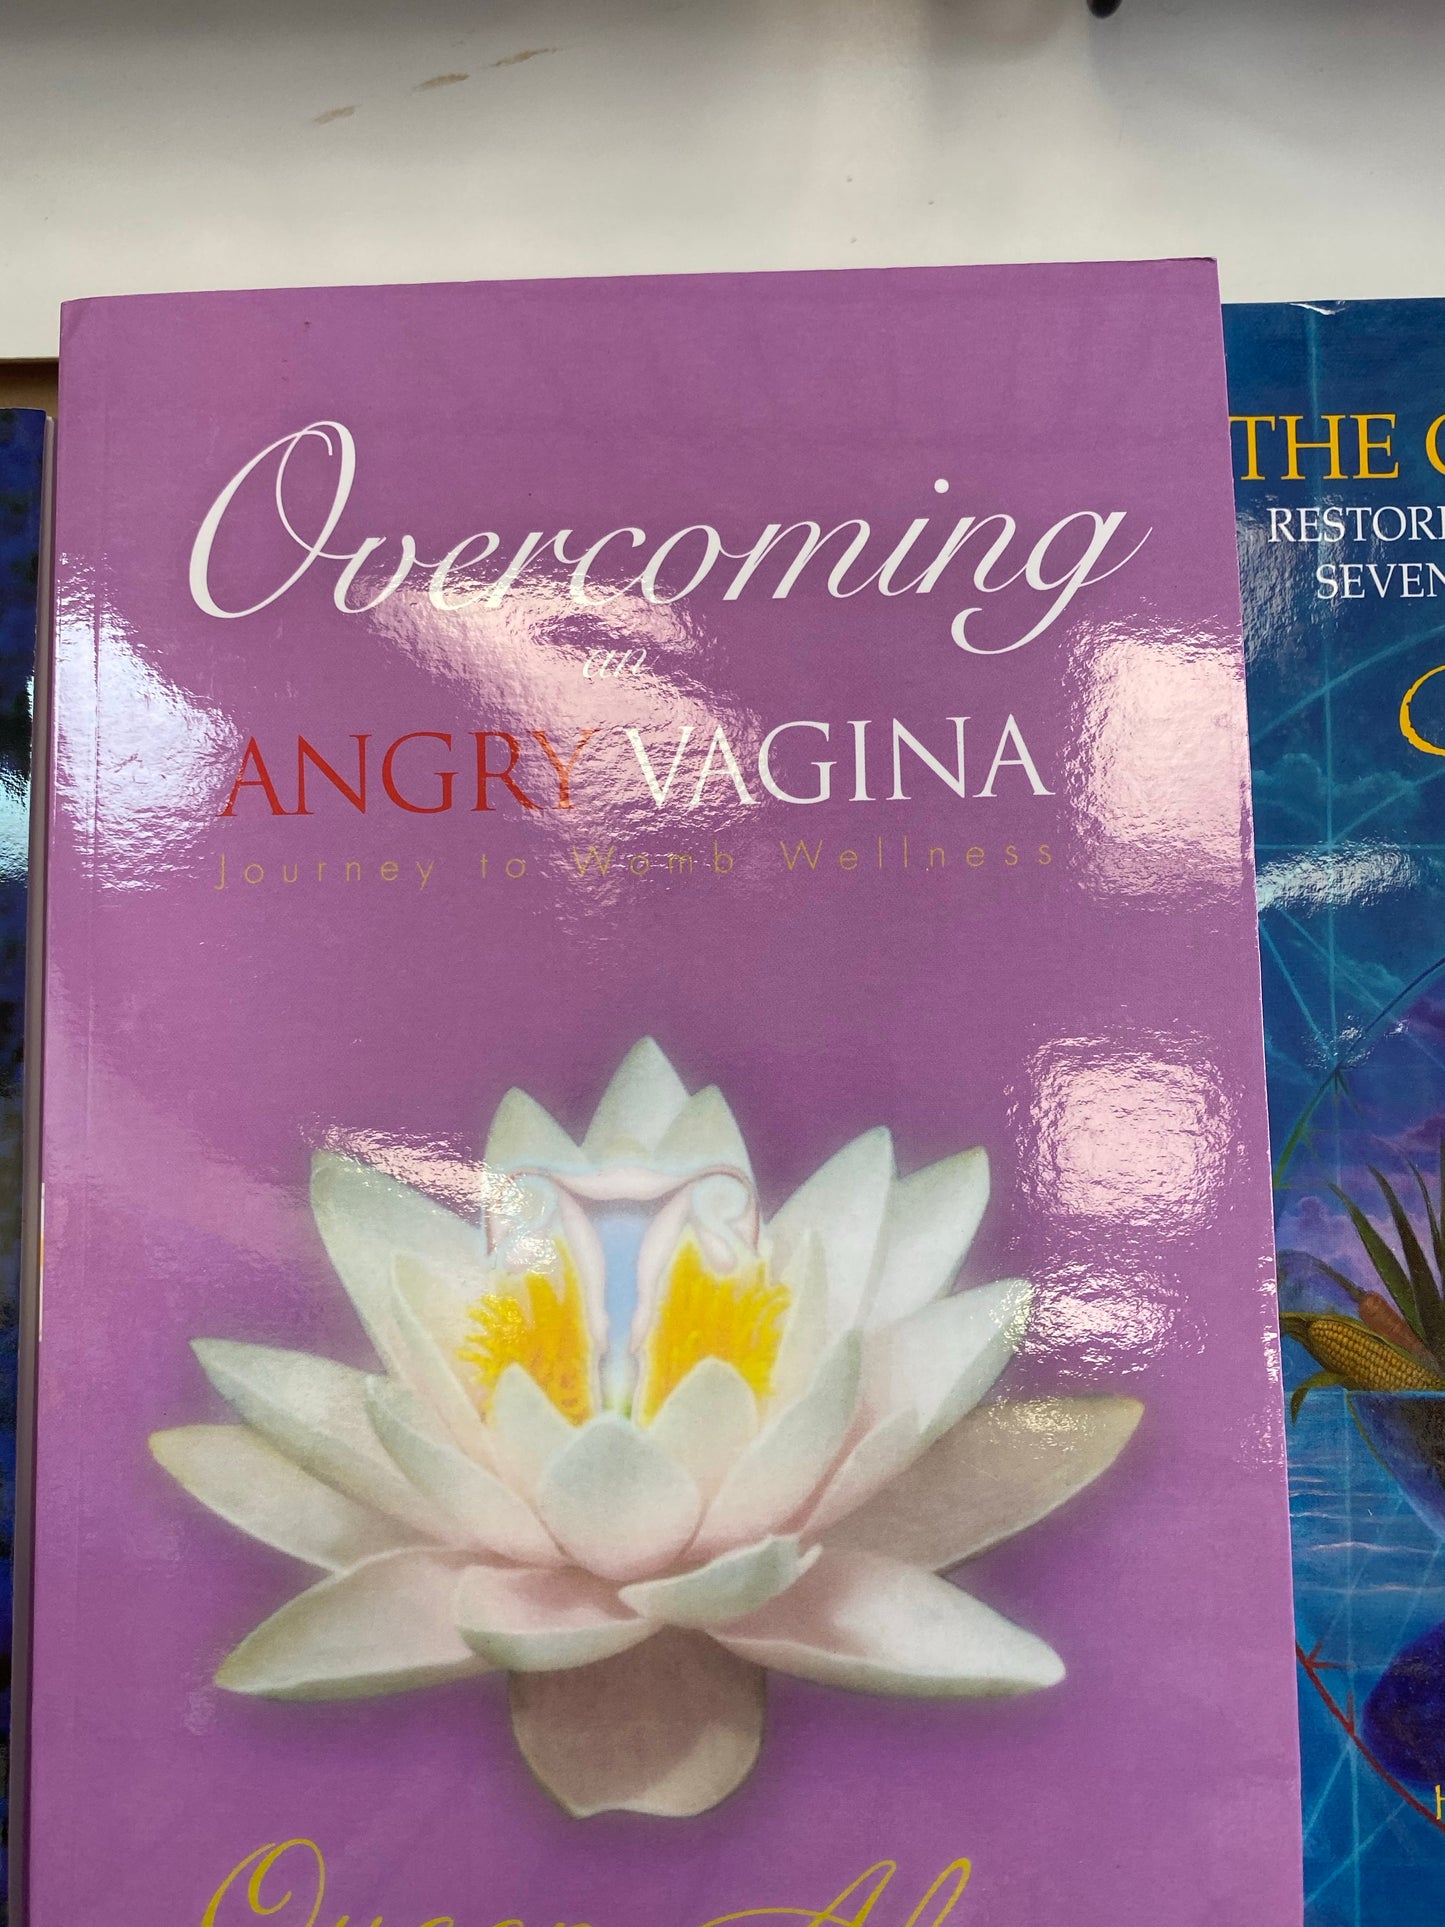 Overcoming Angry Vagina by queen afua